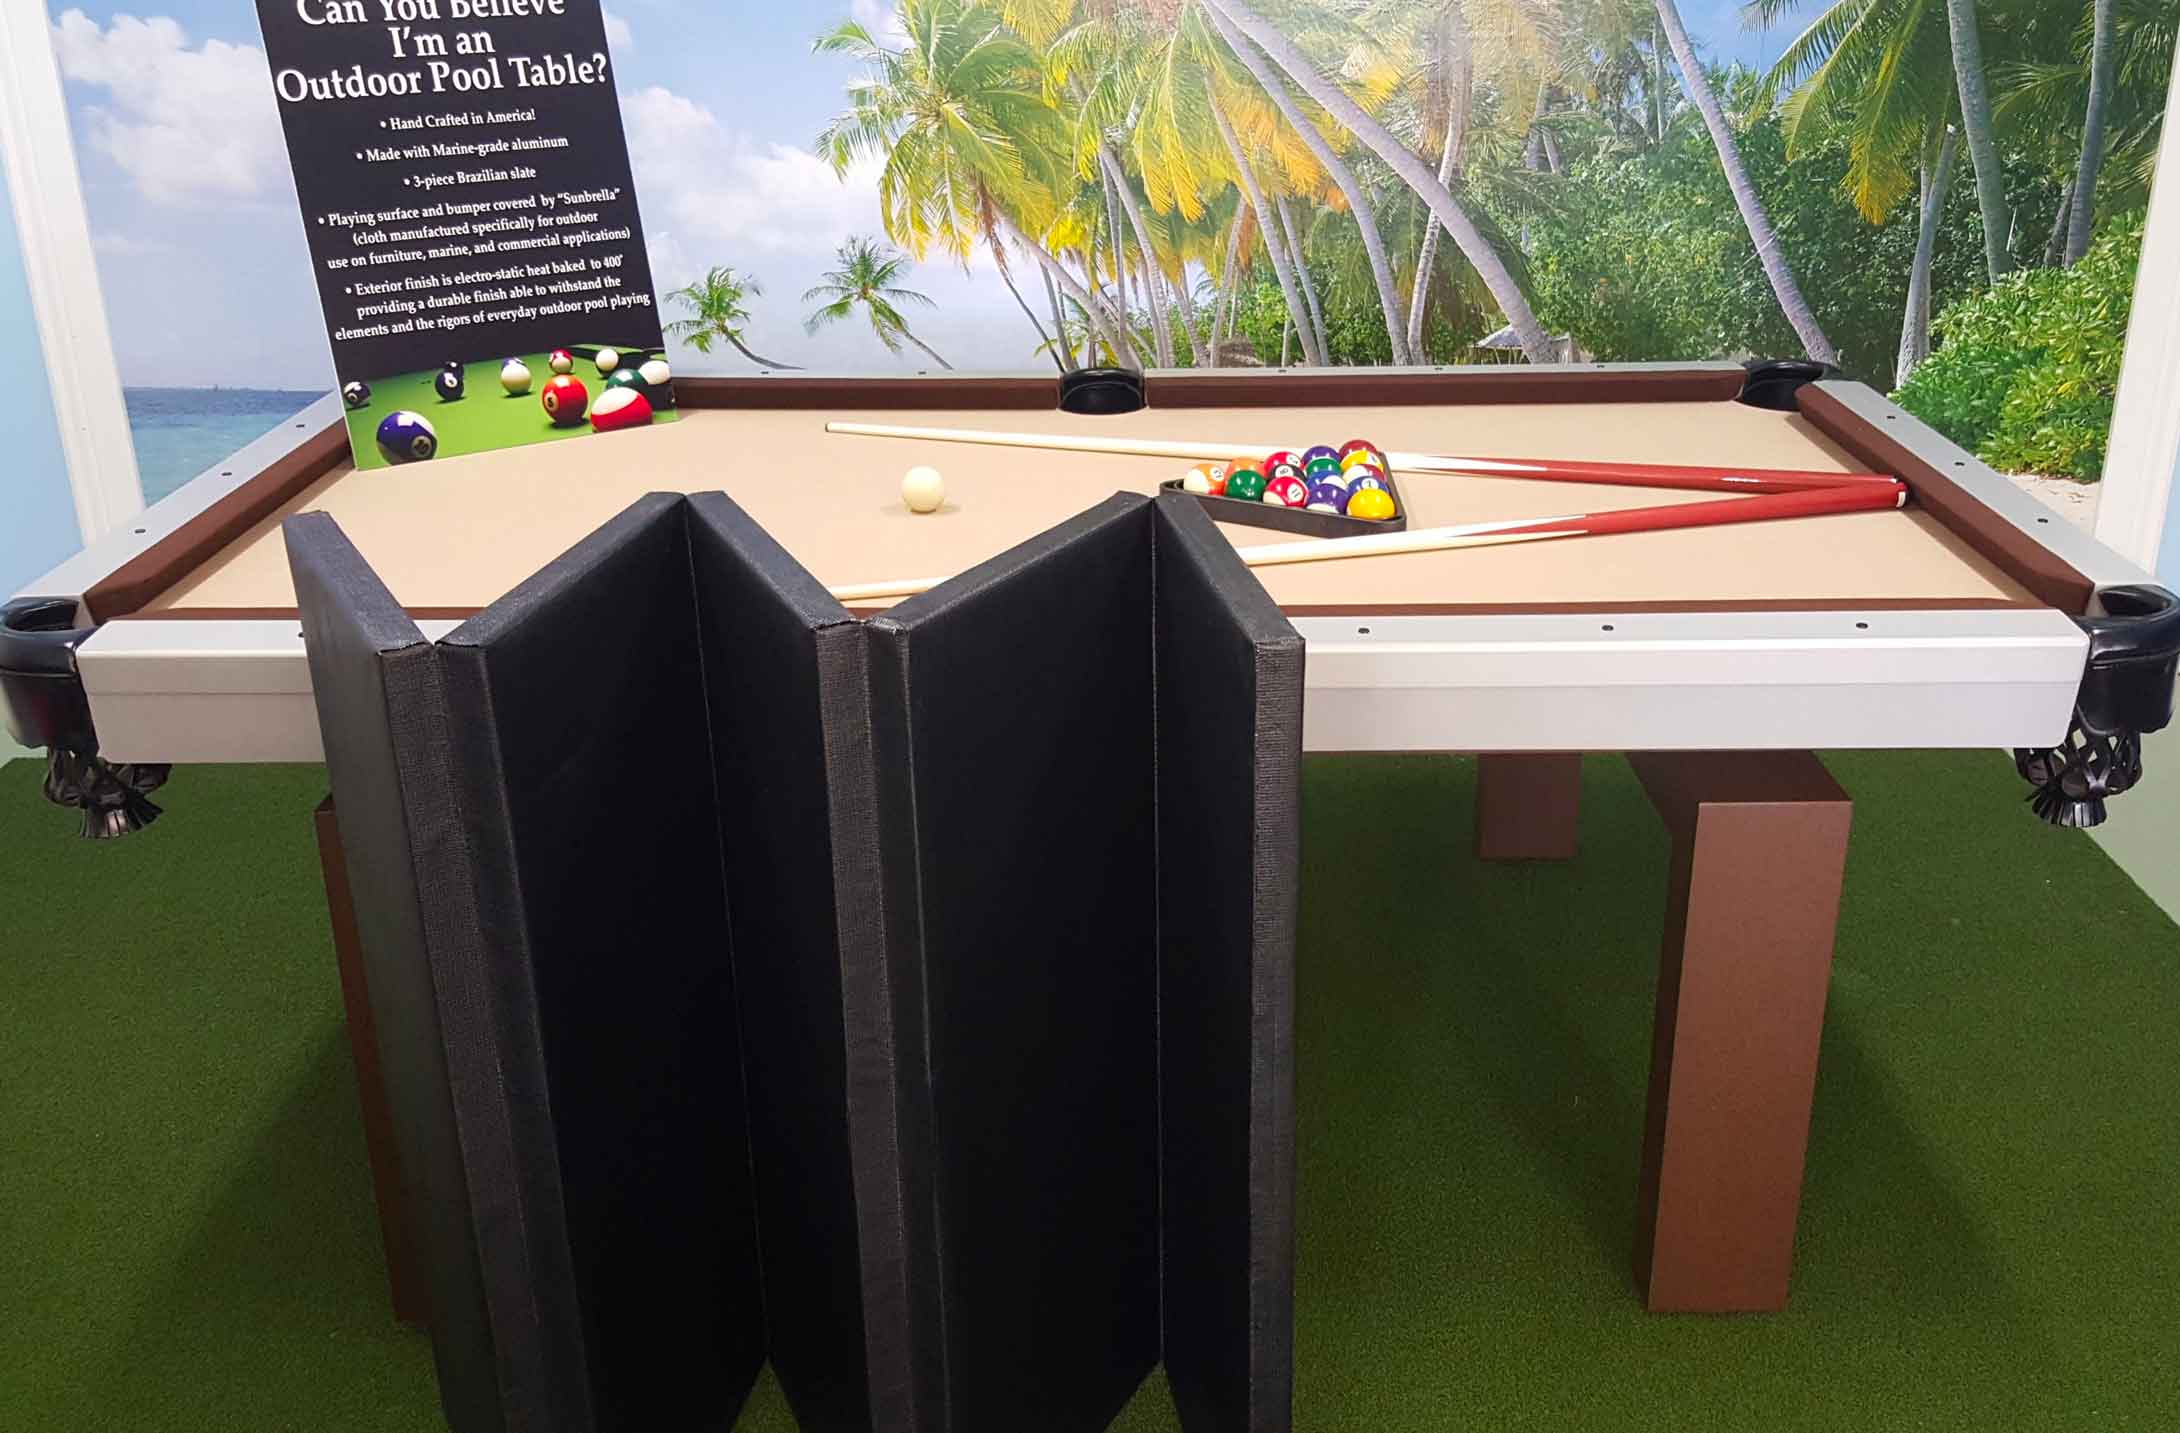 Outdoor pool table with foldable, pool table insert to convert your pool table into entertaining space